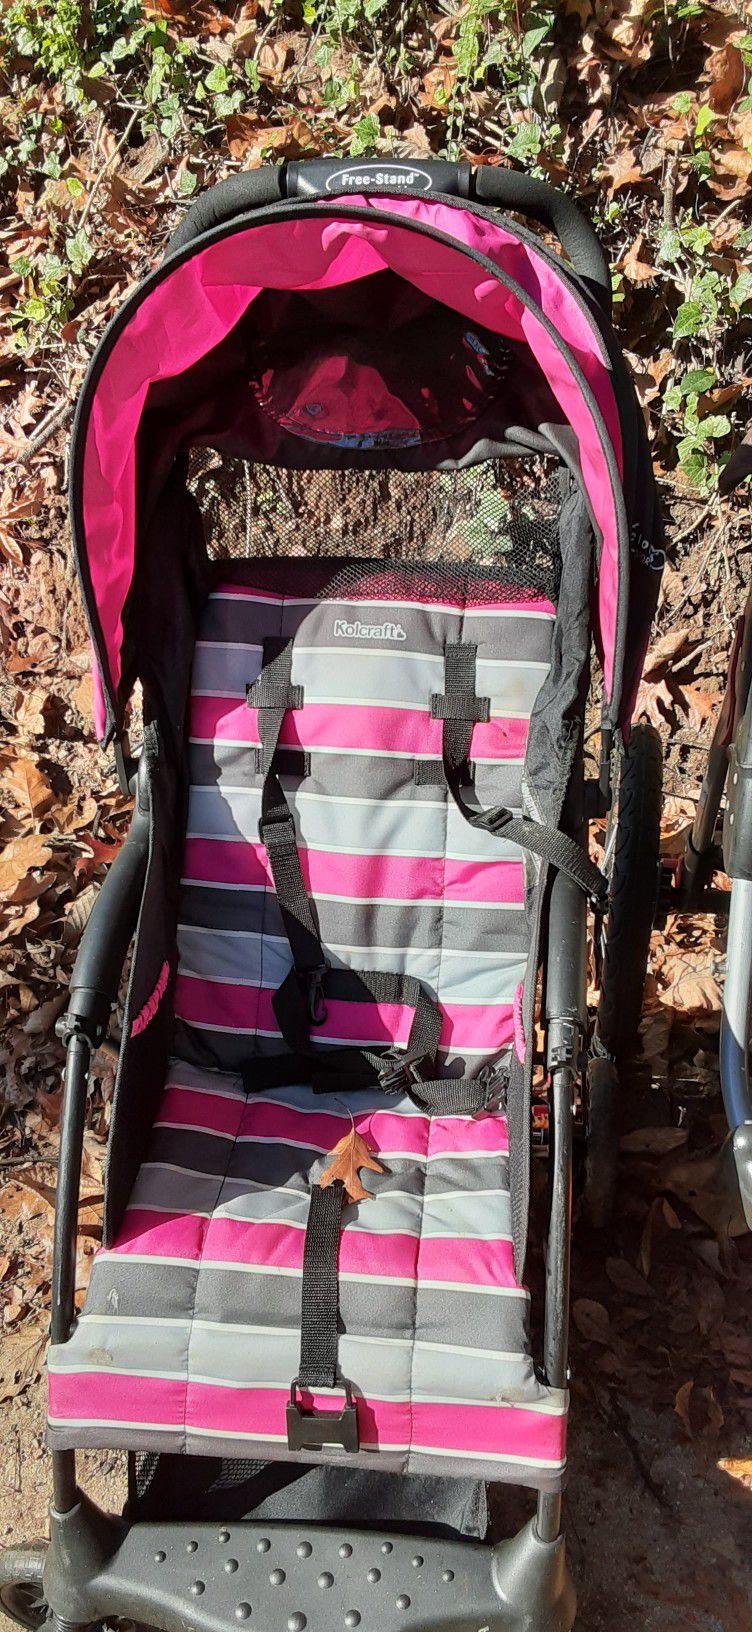 Double Stroller And A Single Stroller